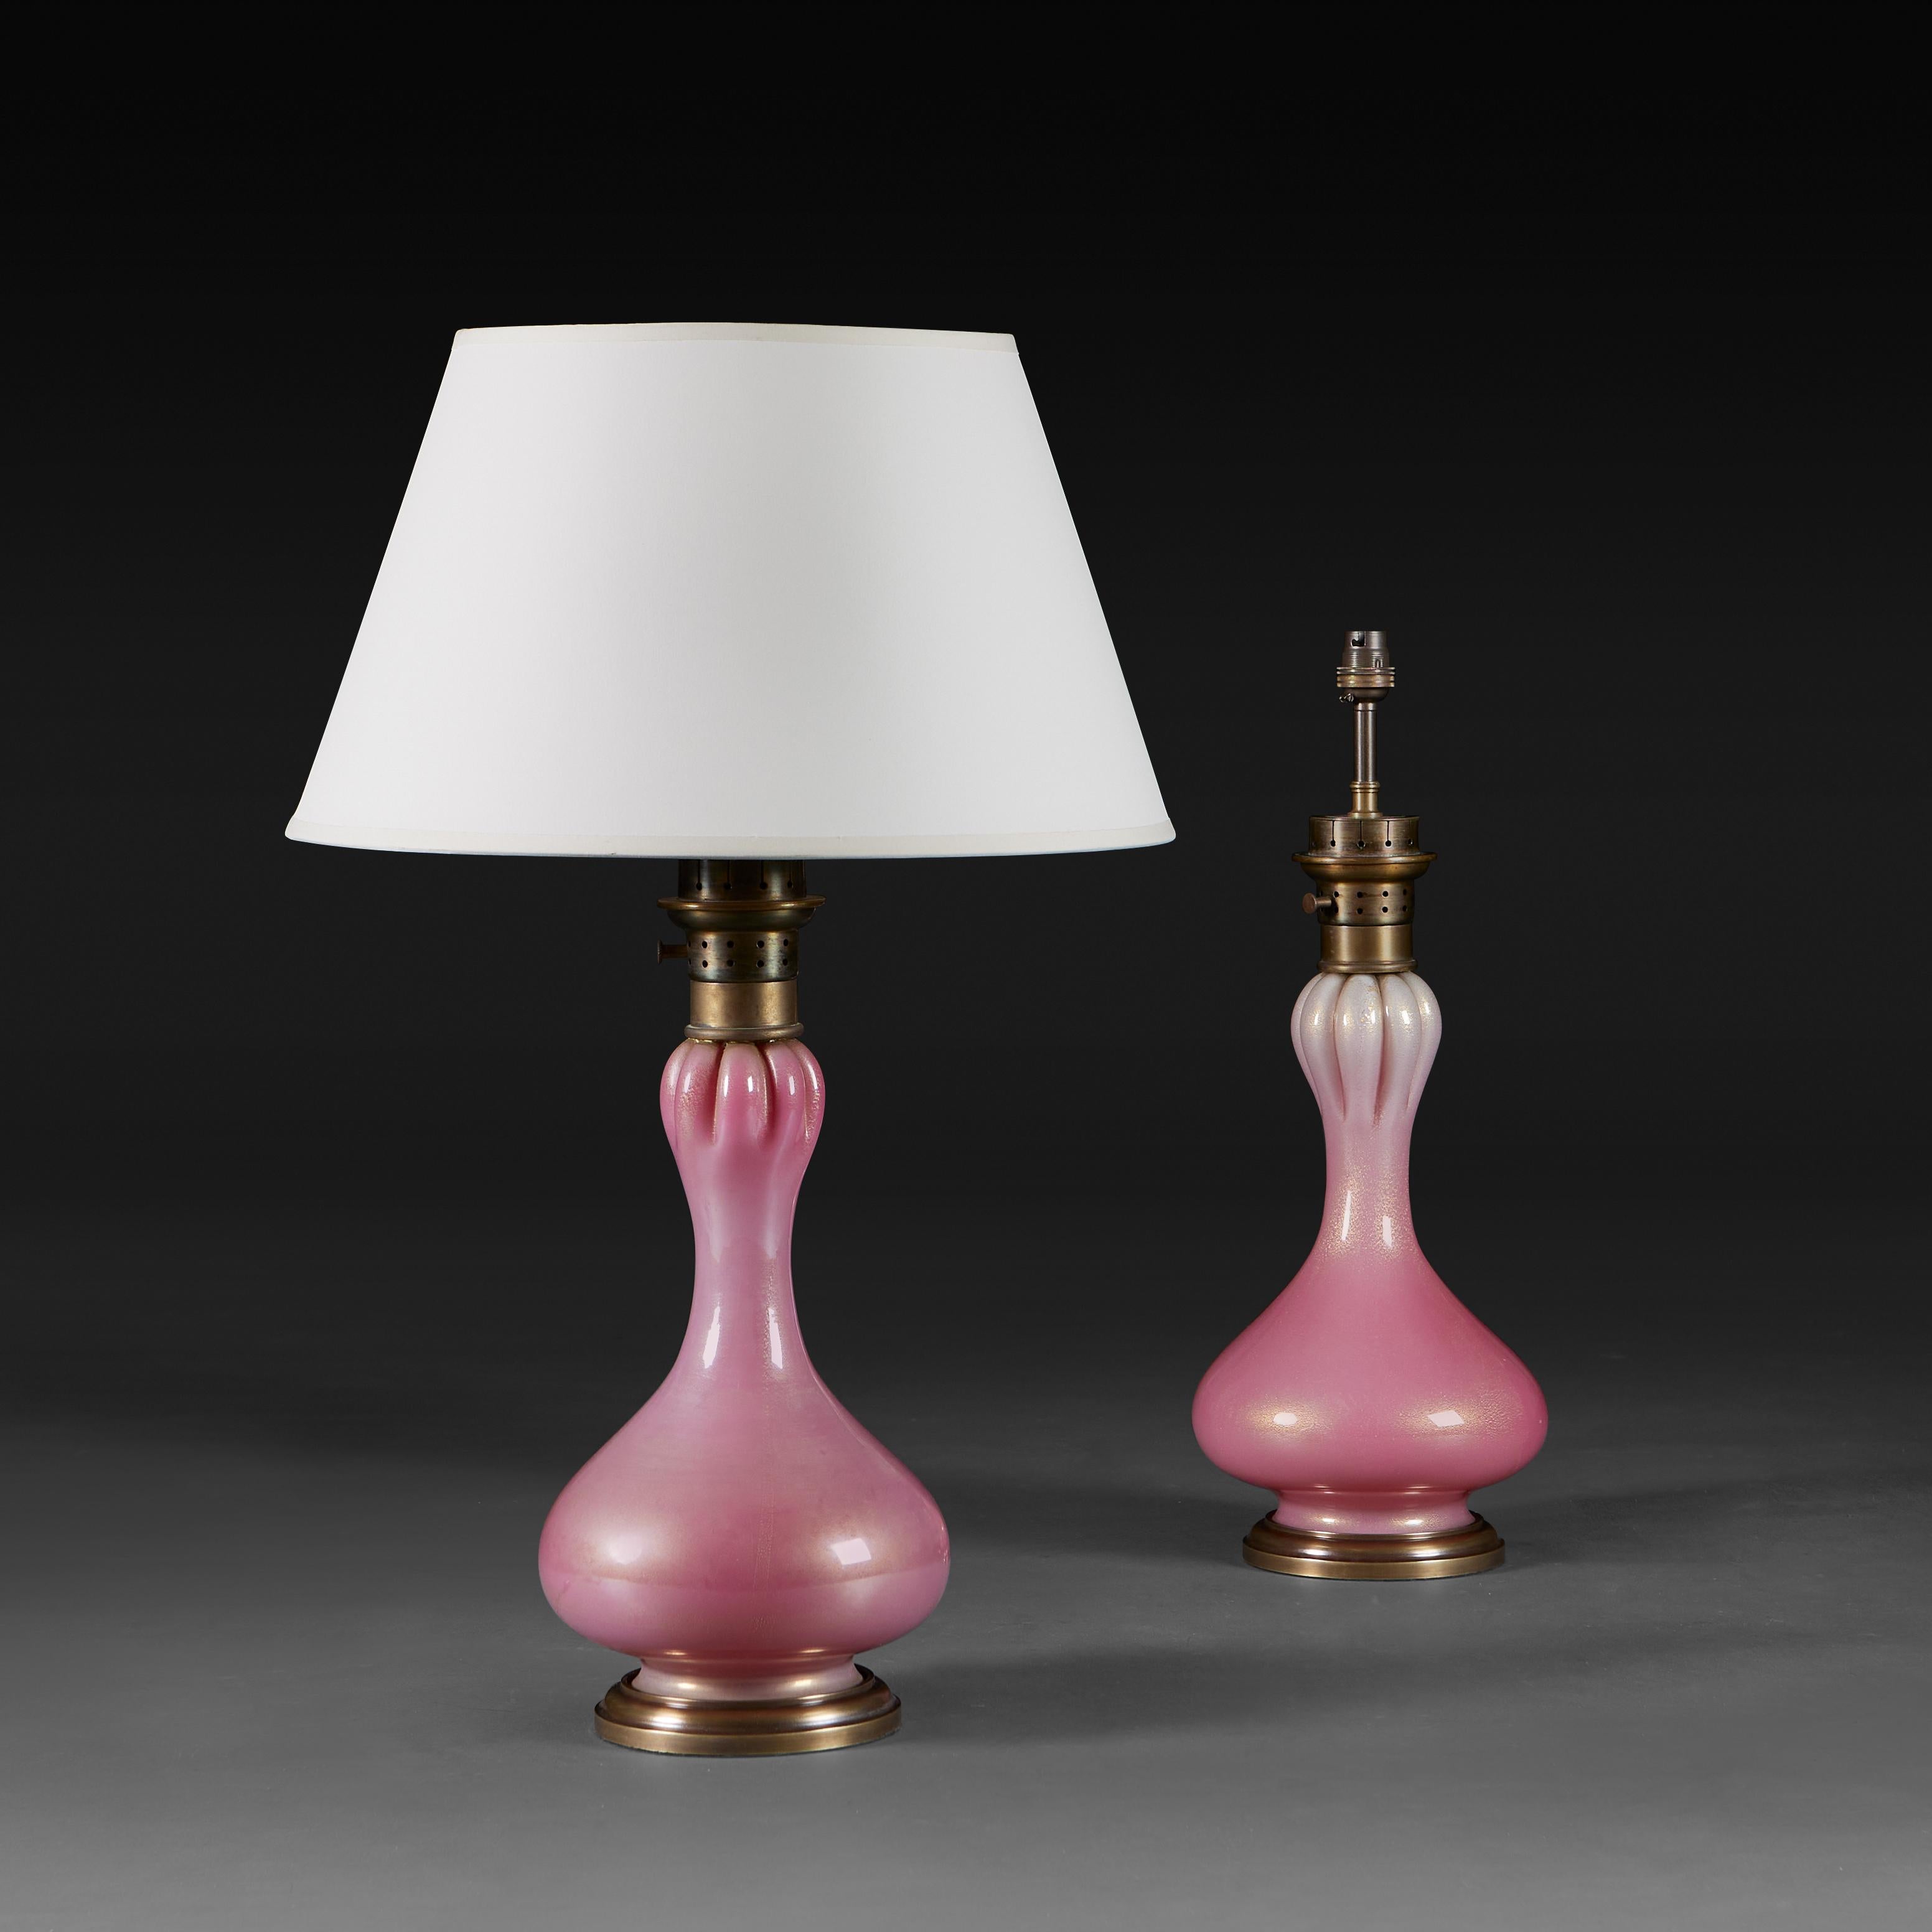 Italy, circa 1950 

A pair of pink Murano glass lamps of bulbous bottle form with gold aaventurina throughout, the necks ribbed and mounted with pierced brass collars and the glass supported on patinated brass bases.

Height 41.00cm
Diameter of base